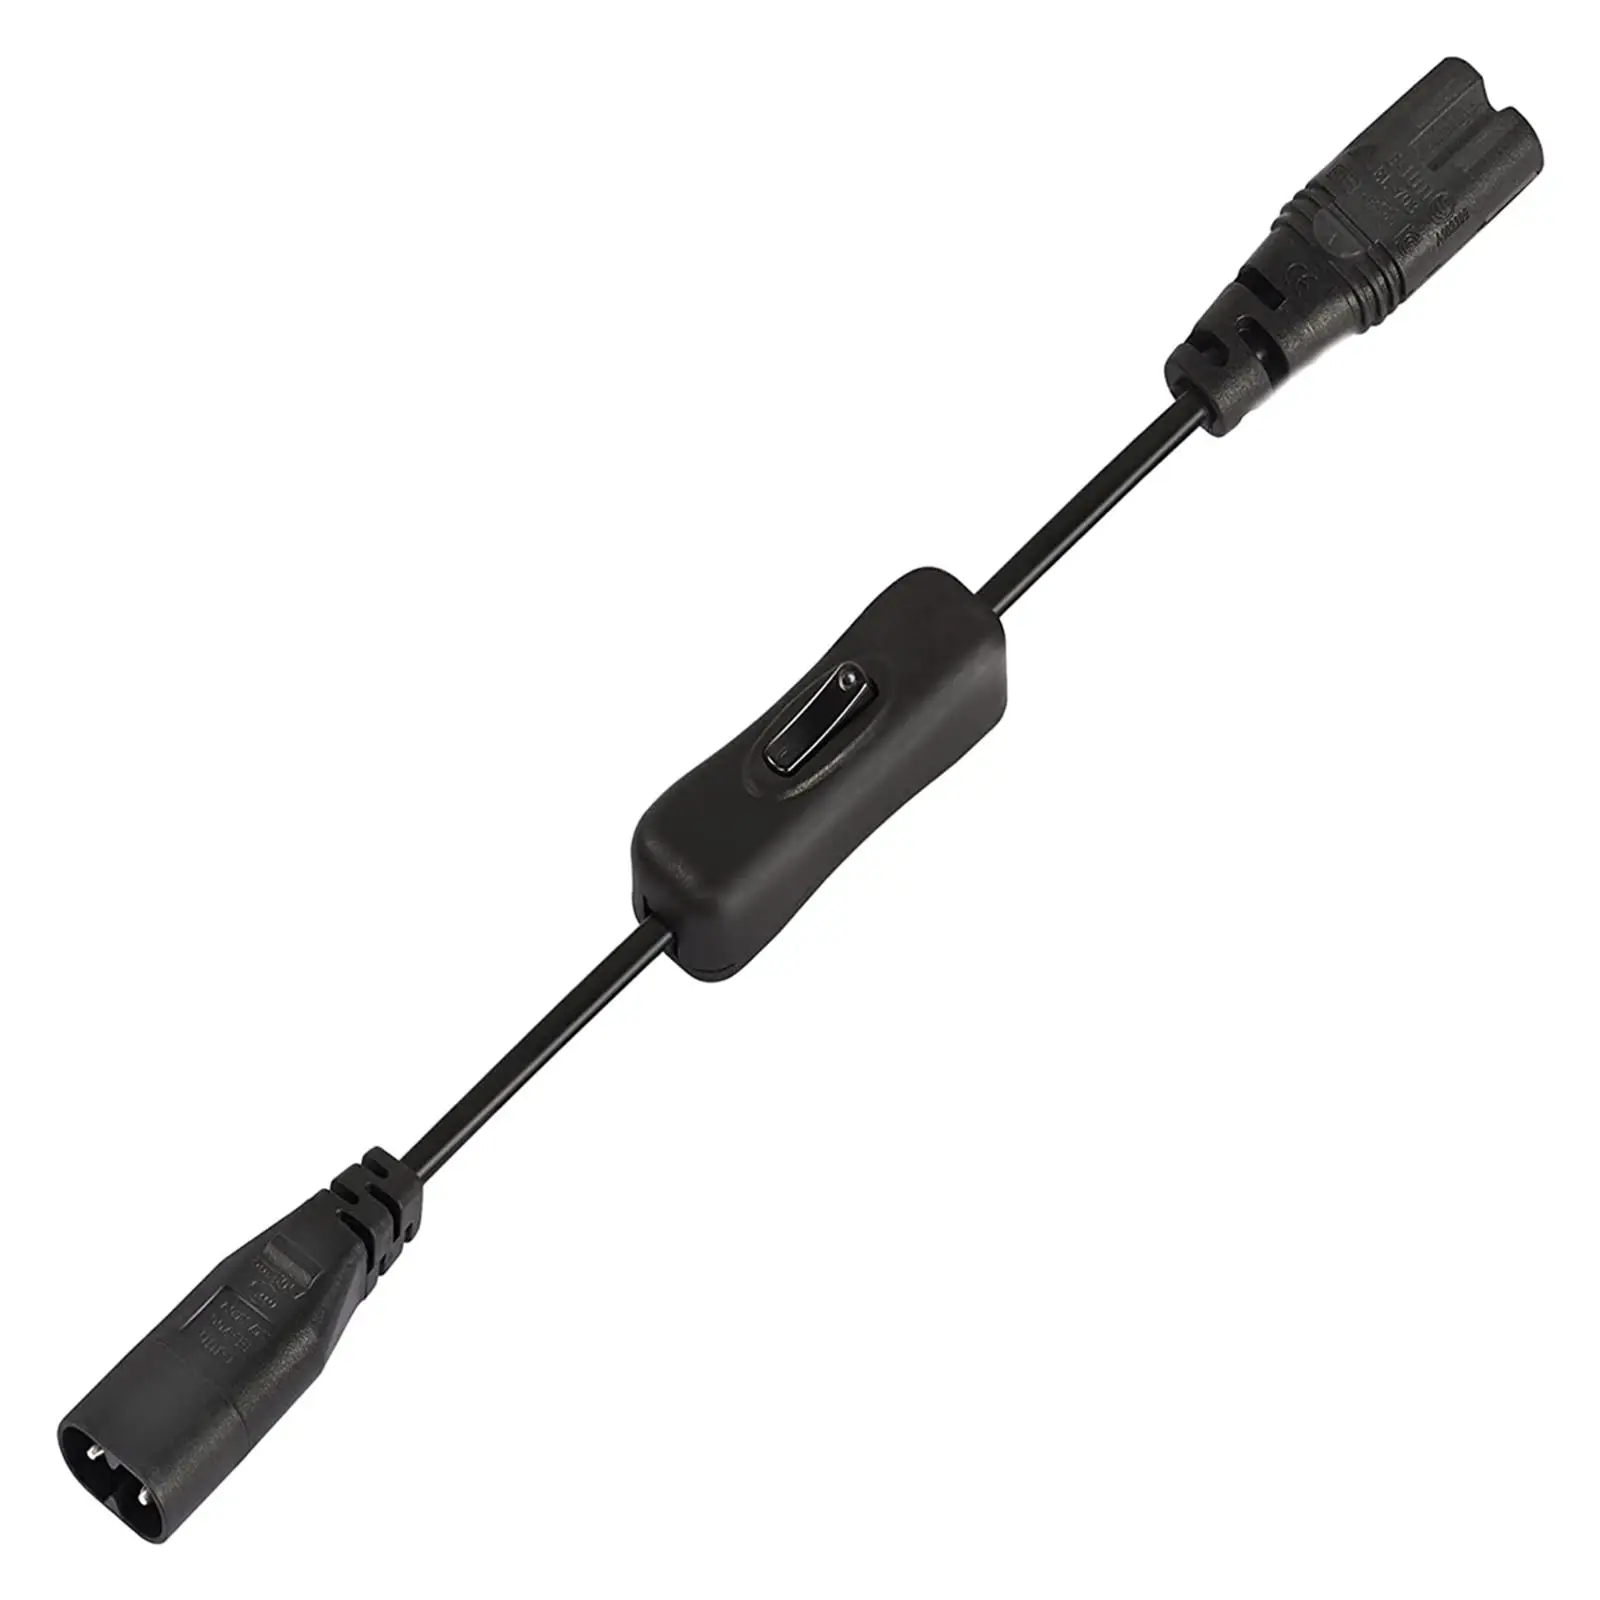 IEC 320 C8 to C7 Power Cable 0.3M with Switch Replacement Power Cord Power Supply Adapter Wire for TV Computer Monitor